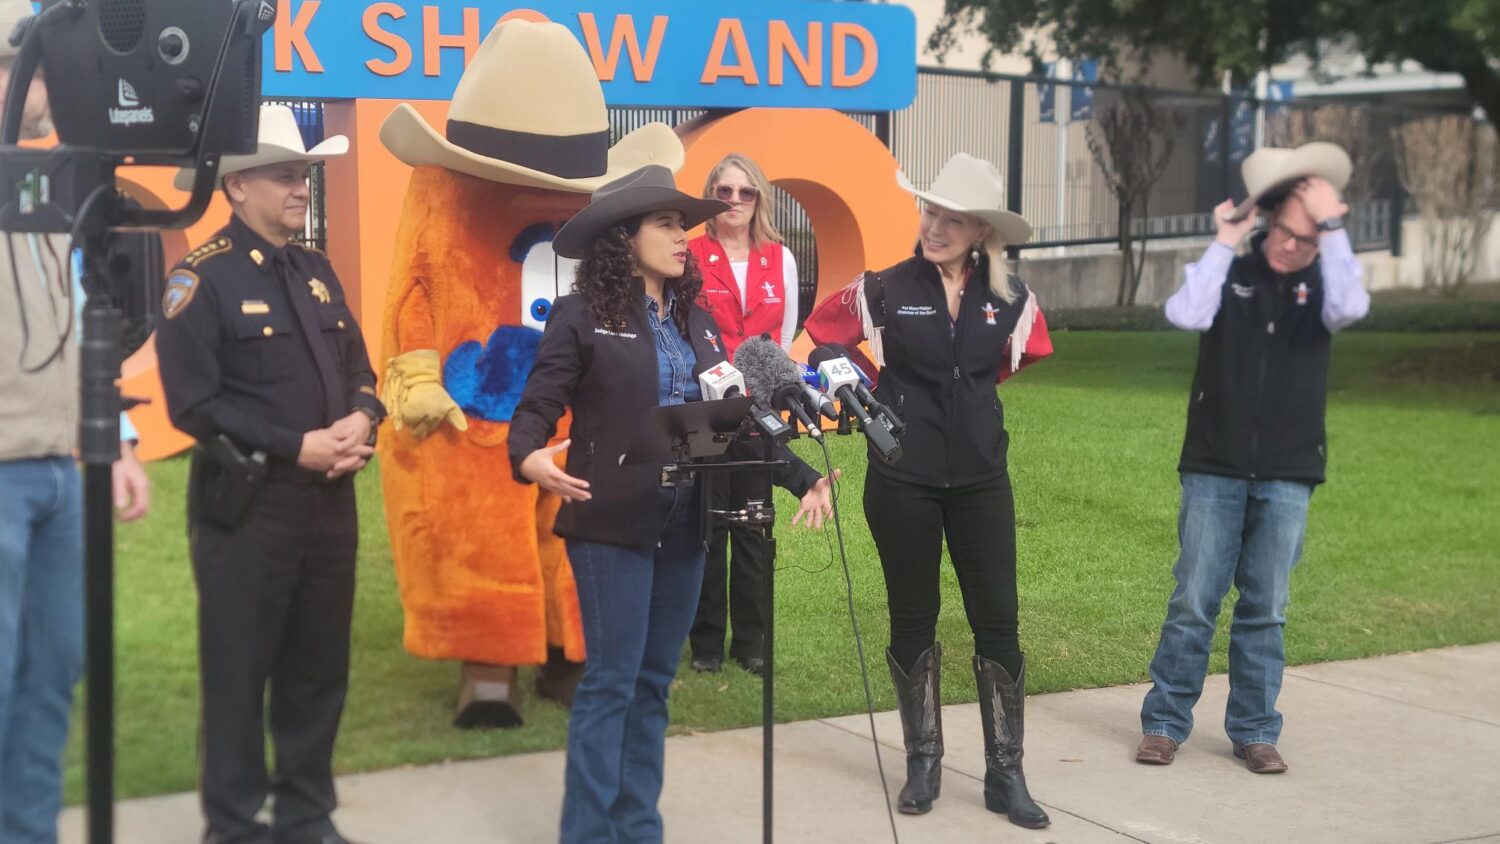 Harris County officials celebrate Houston Livestock Show and Rodeo with first “Hat Toss Day” | Houston Public Media